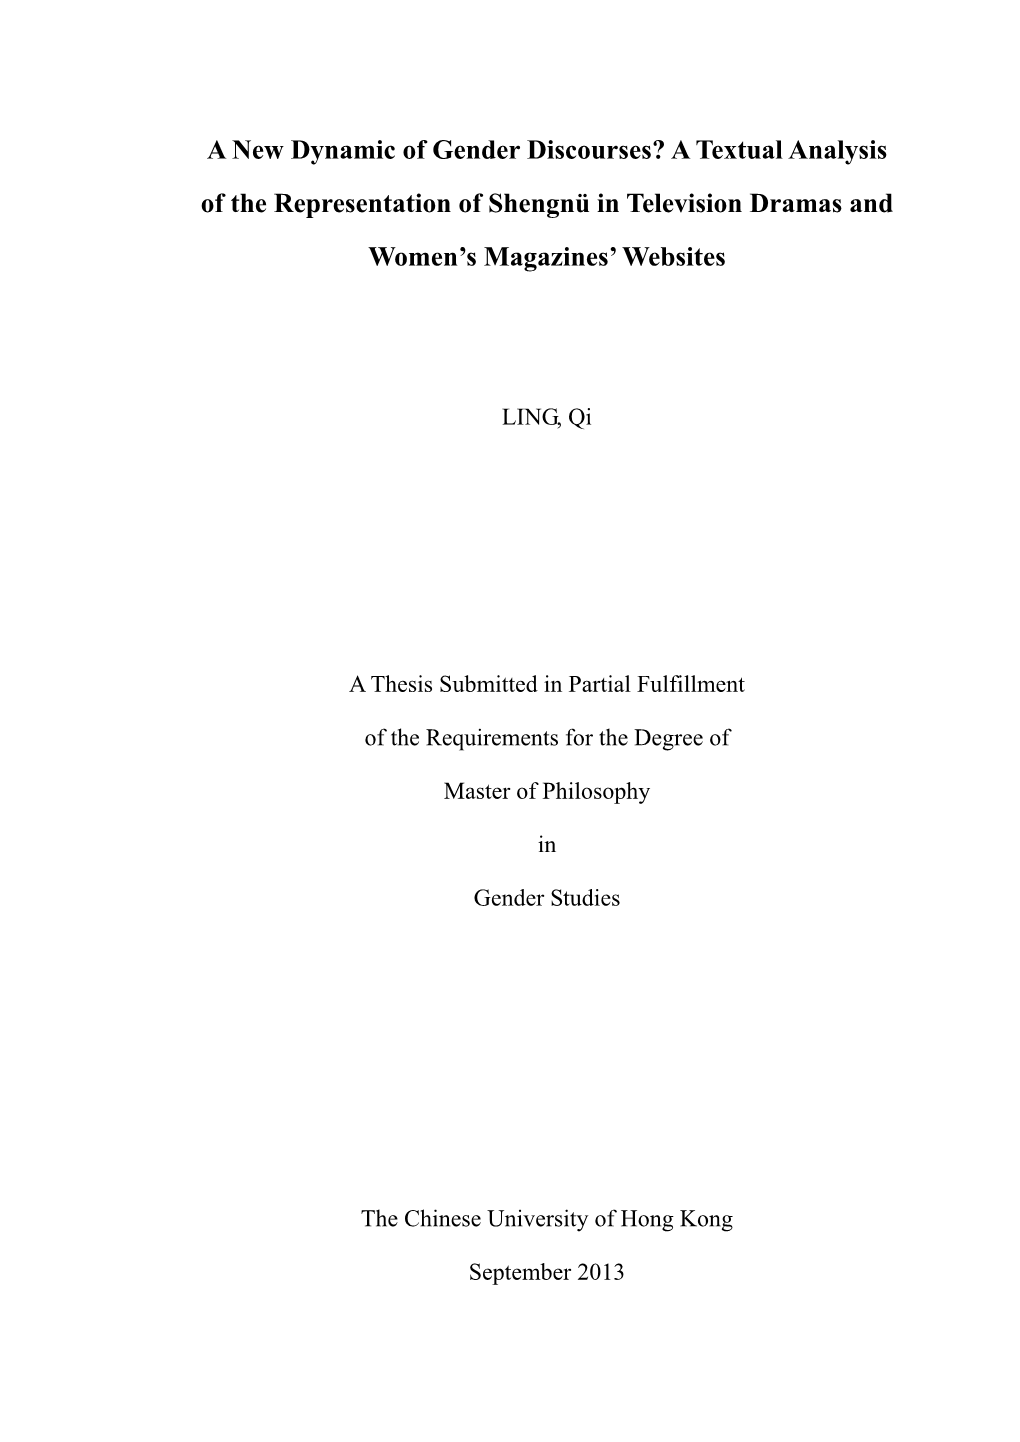 A New Dynamic of Gender Discourses? a Textual Analysis of the Representation of Shengnü in Television Dramas and Women’S Magazines’ Websites